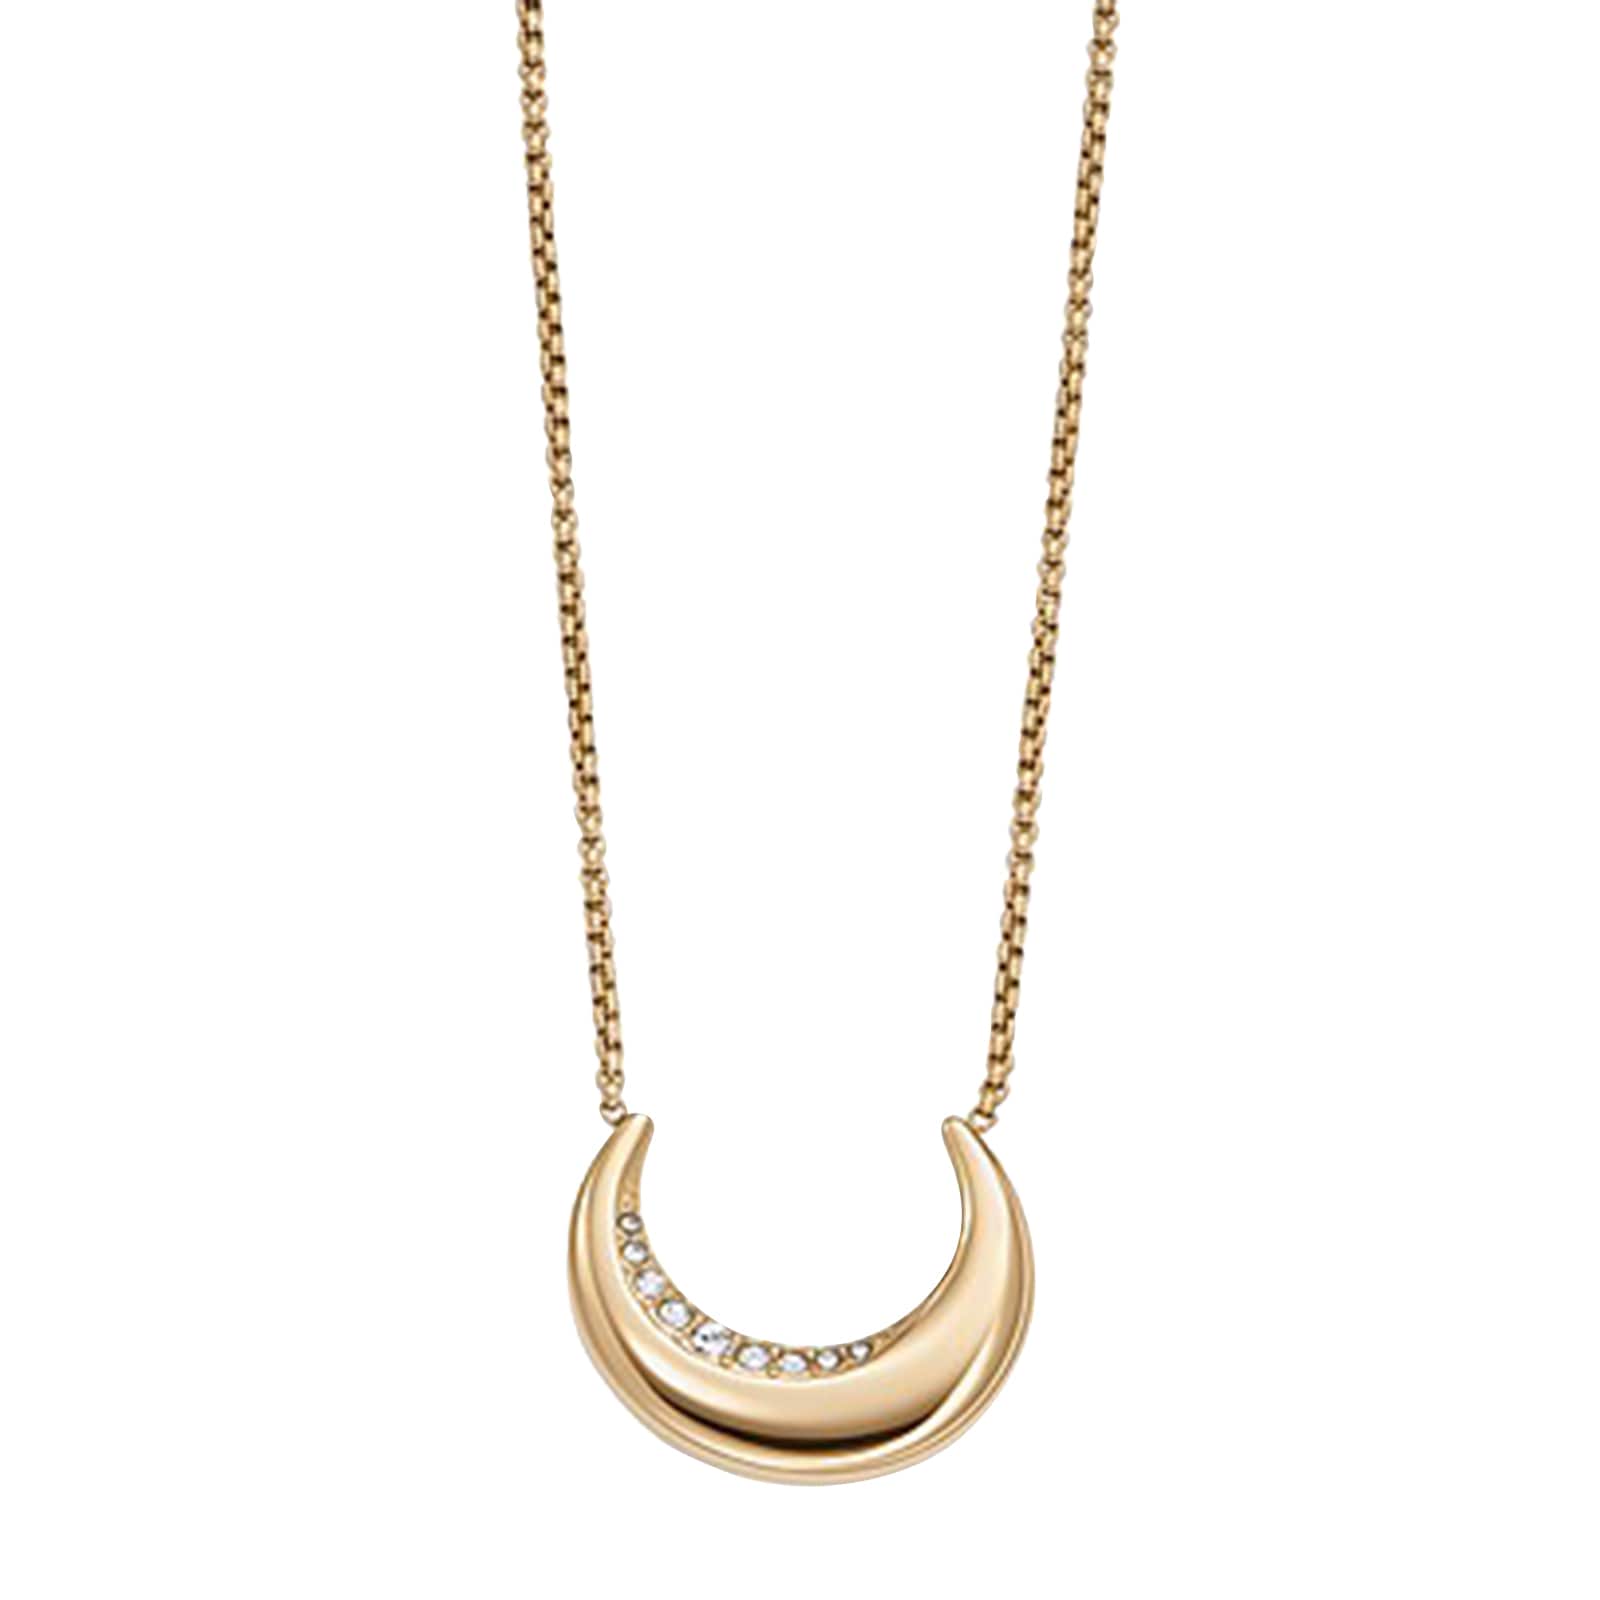 Kariana Gold Tone Stainless Steel Pendant Necklace